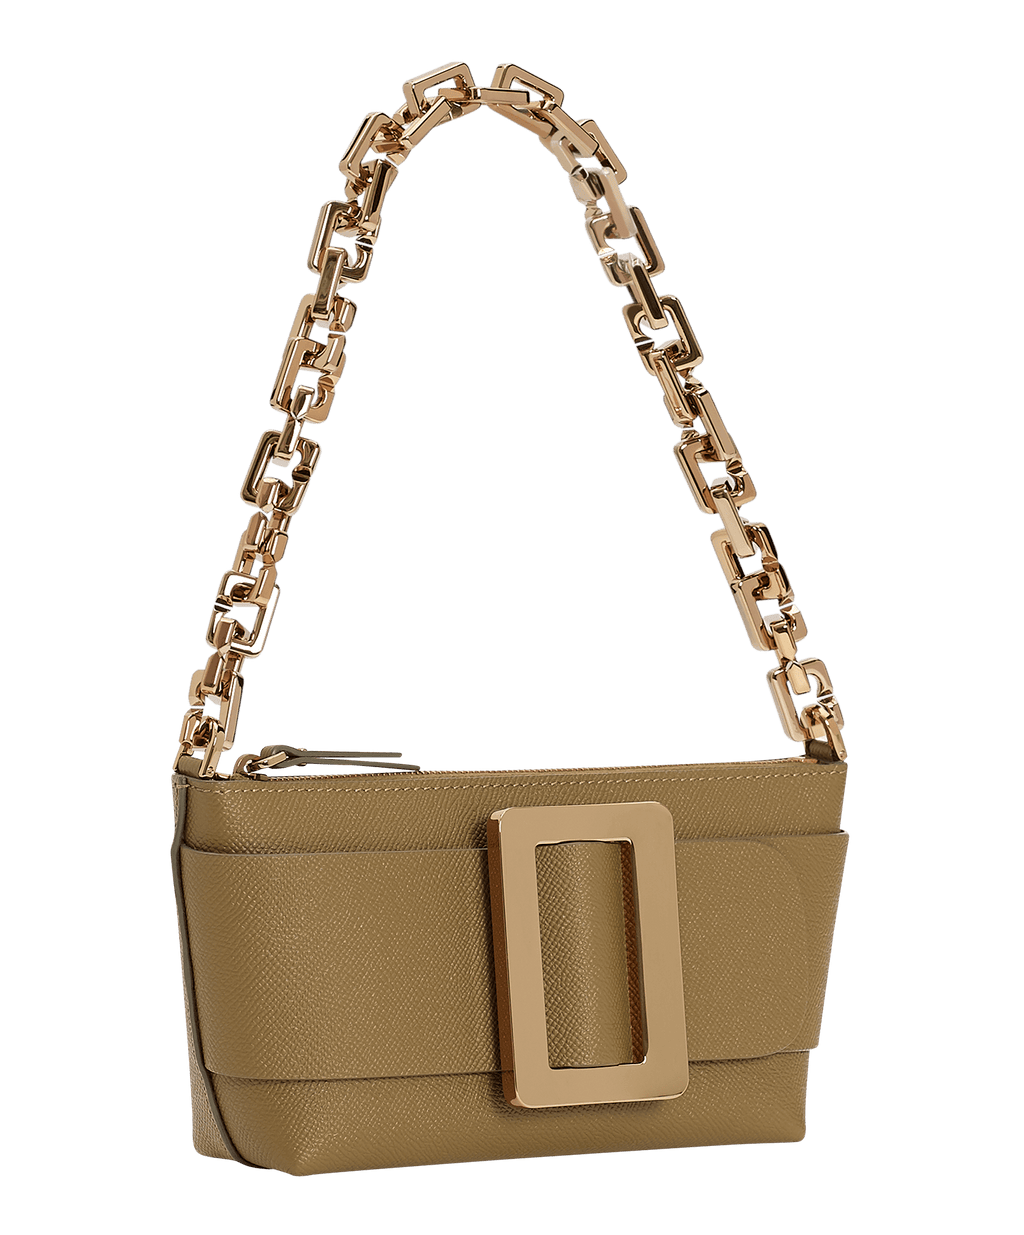 Small, brown shoulder bag with a large gold buckle on the front, Made with grained calfskin leather.